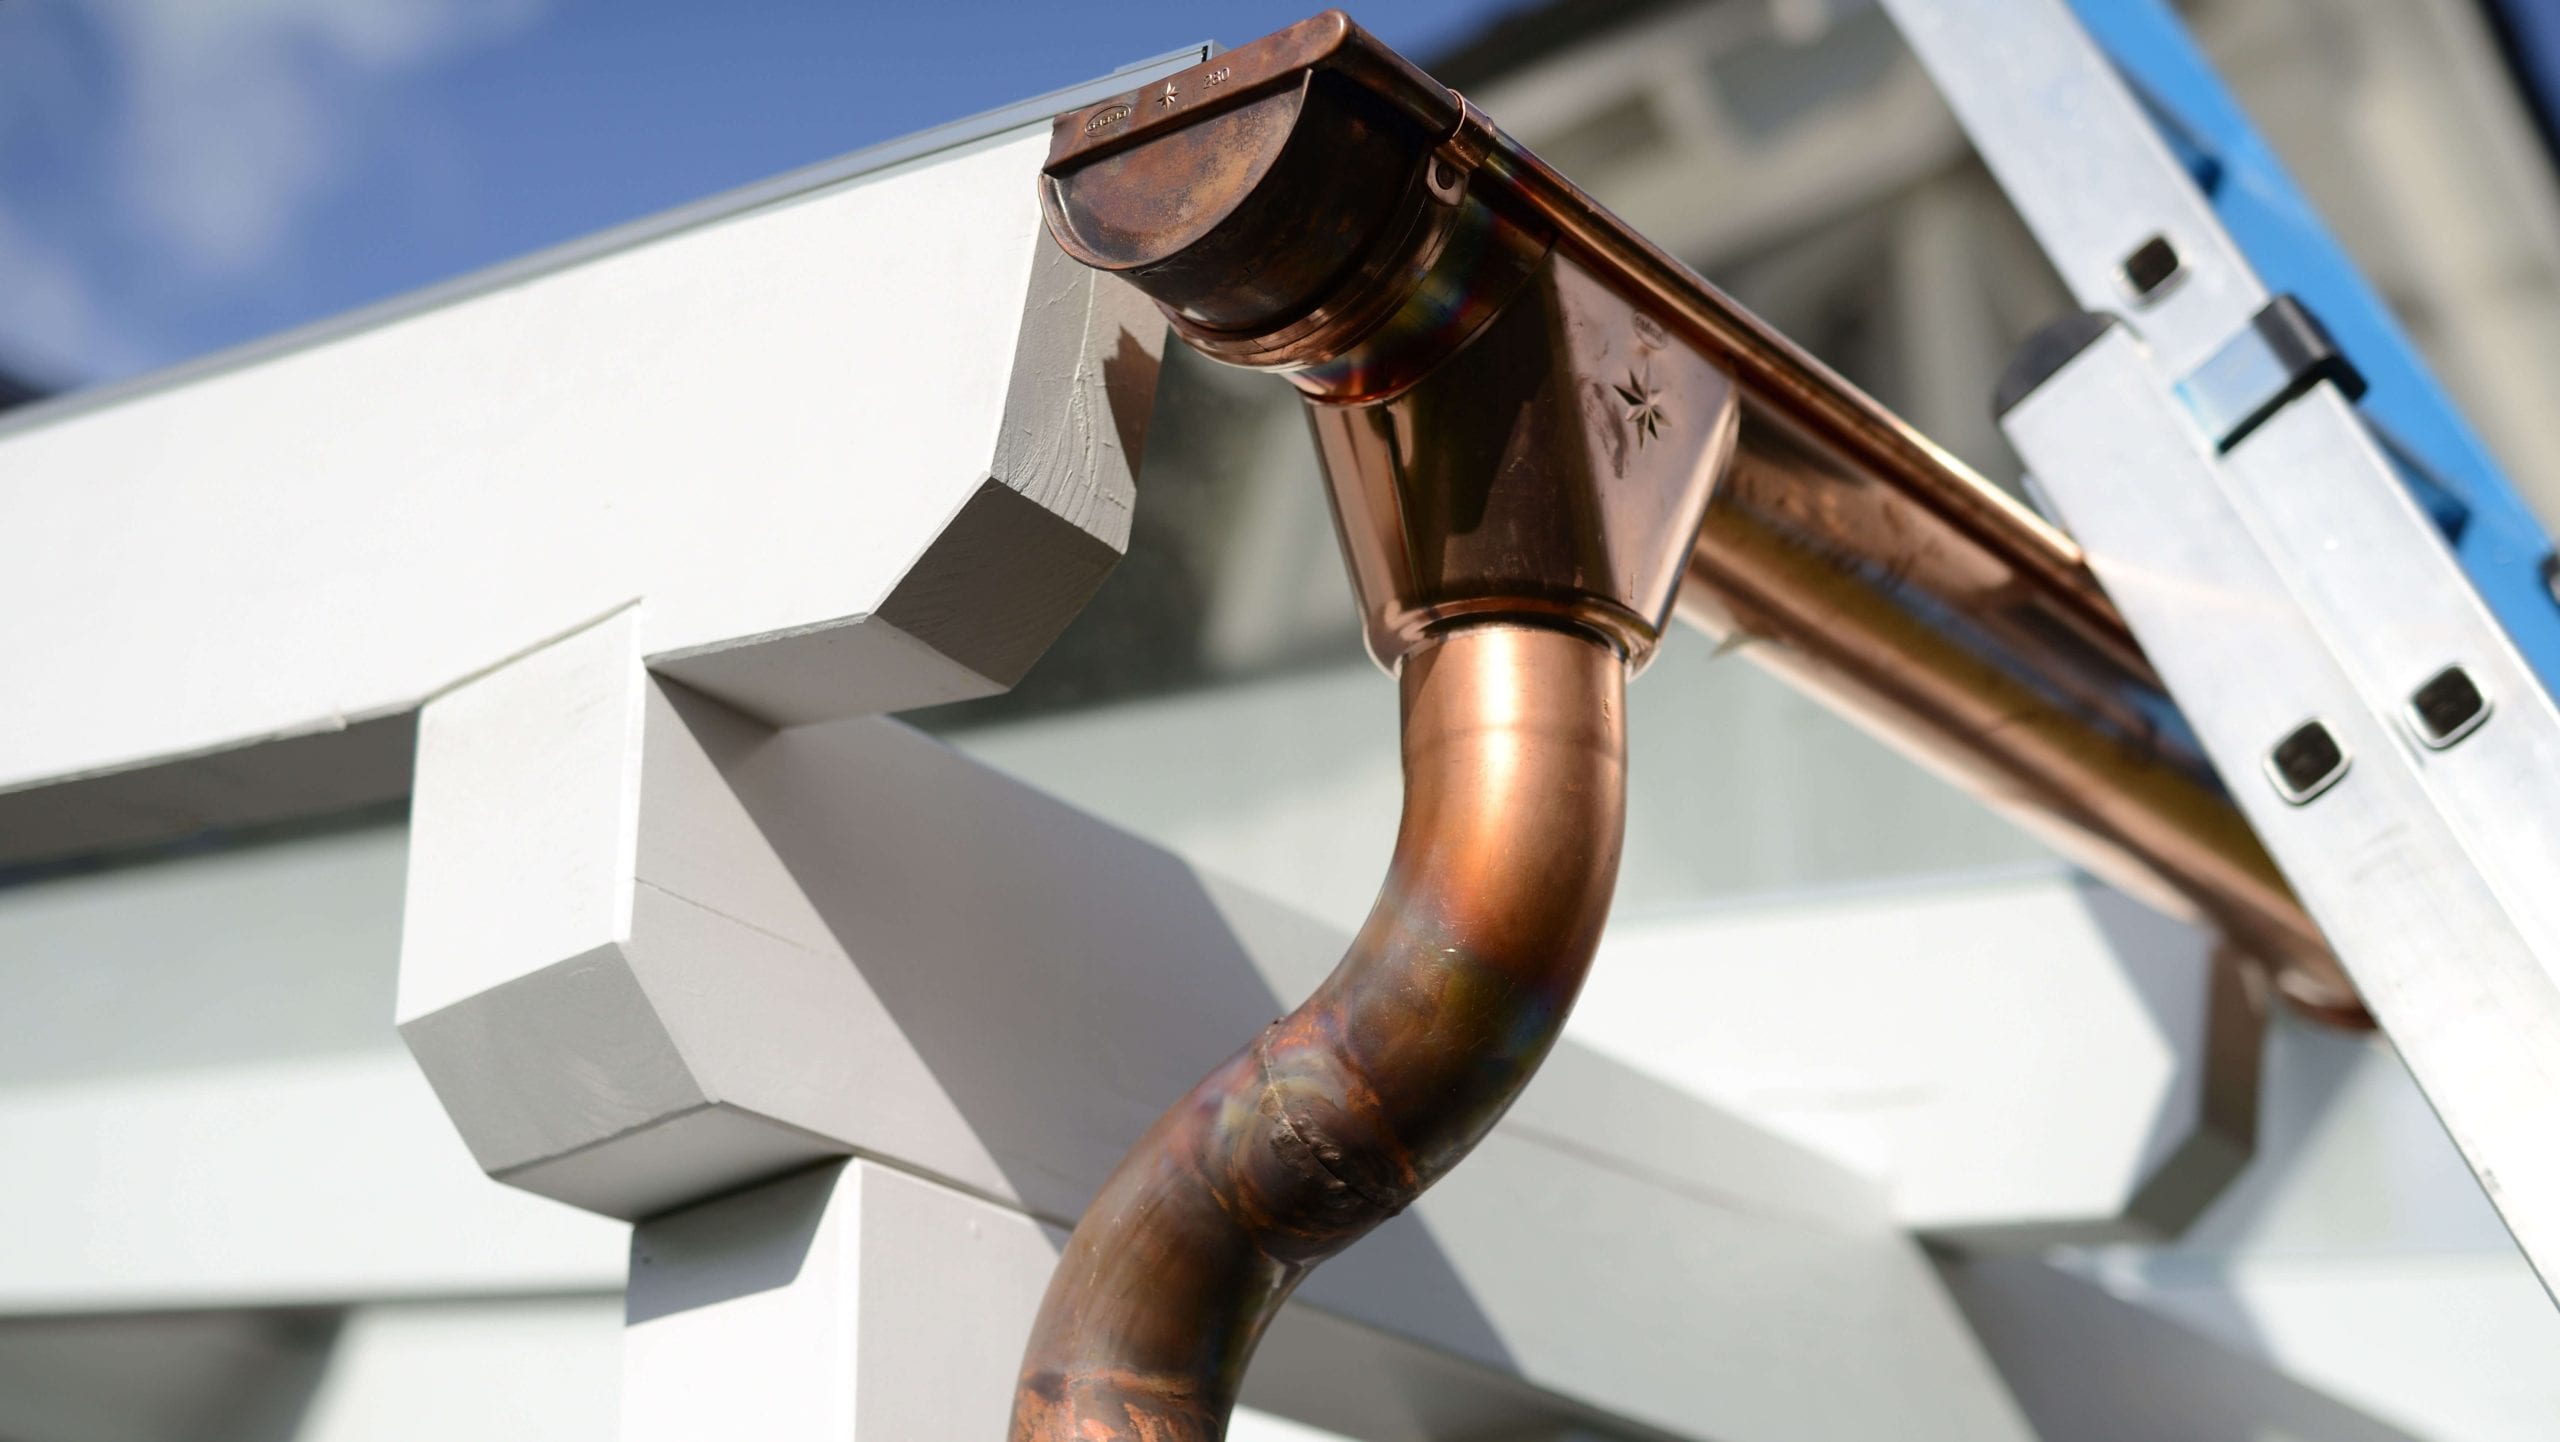 Make your property stand out with copper gutters. Contact for gutter installation in Fort Worth